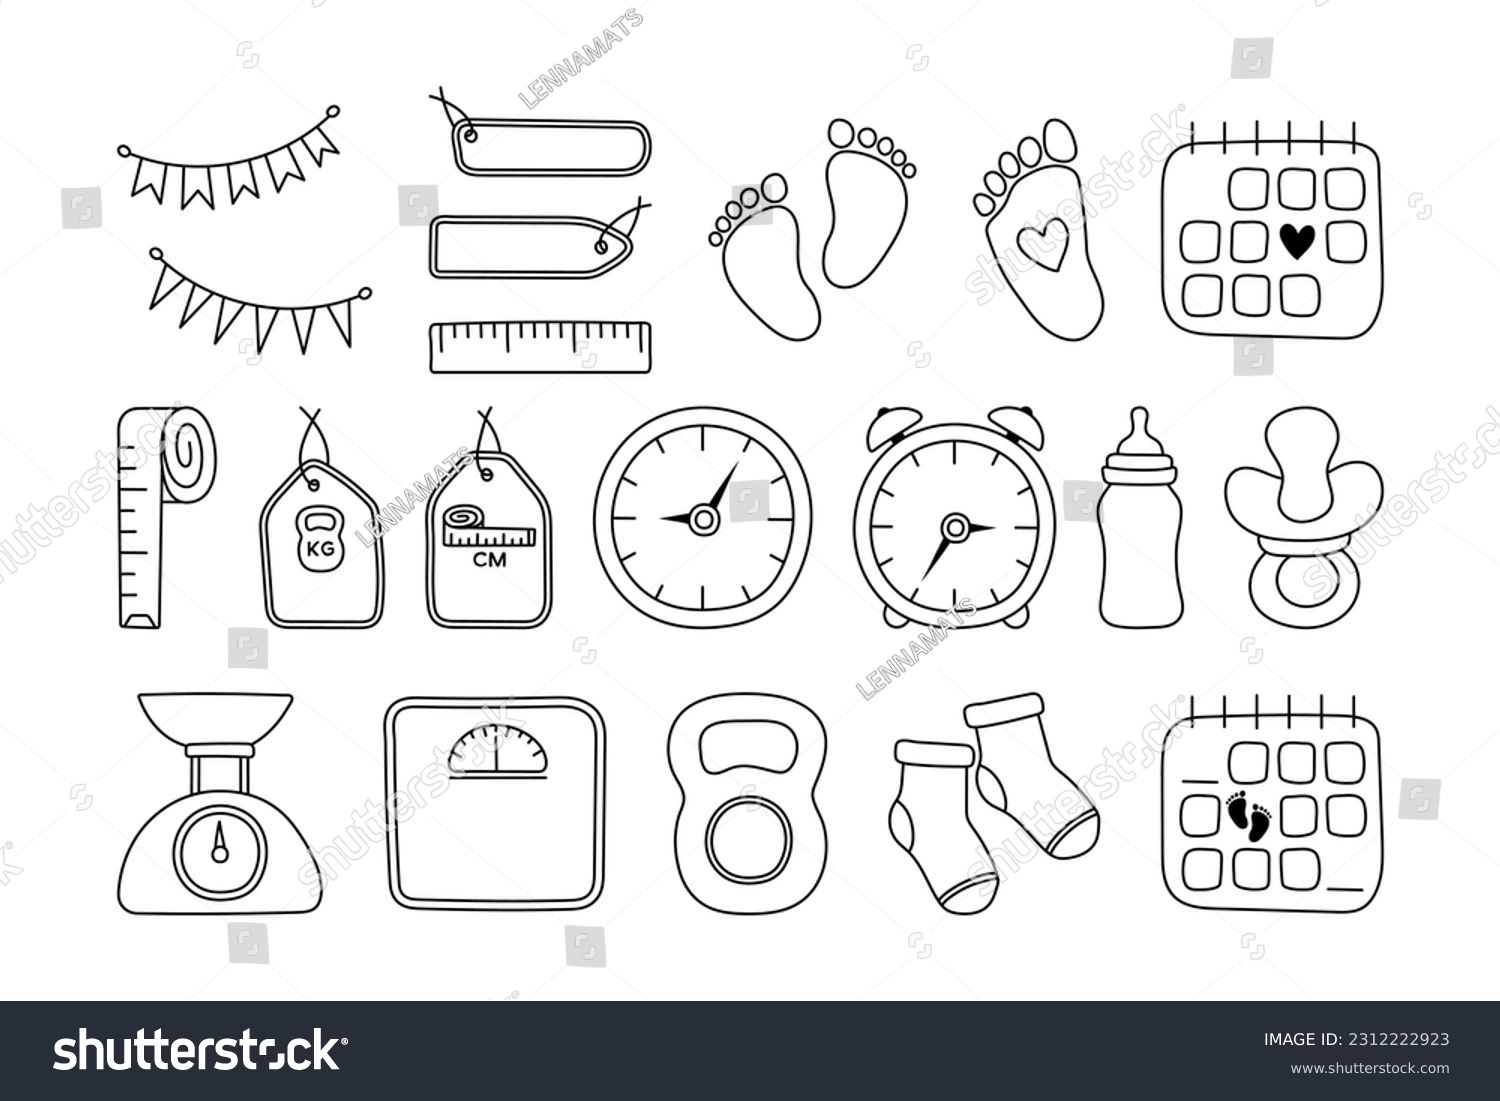 SVG of Set baby metric doodles. Birth announcement. Vector set newborn hand drawn elements. Gender party outline icons. Birth stats line art illustrations. Age, height, weight data and cute baby accessories. svg